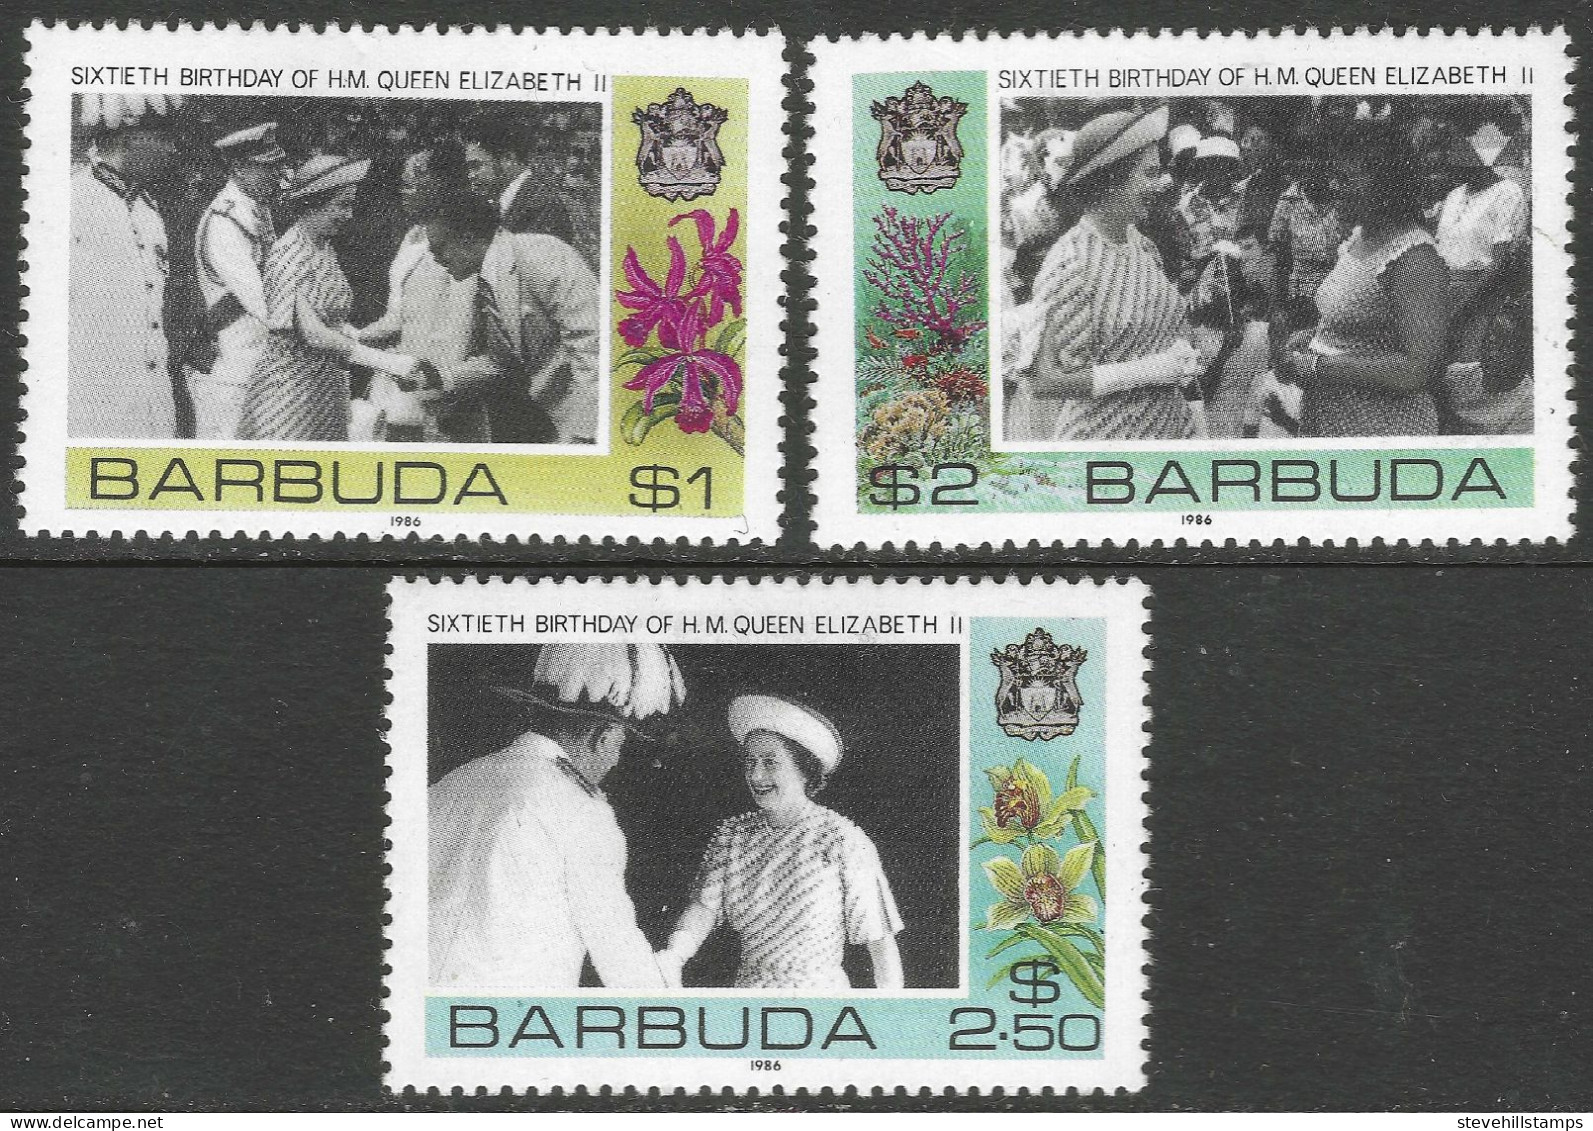 Barbuda. 1986 60th Birthday Of QEII (1st Issue).  MH Complete Set (excl M/S).  SG 861-863. M4062 - Antigua And Barbuda (1981-...)